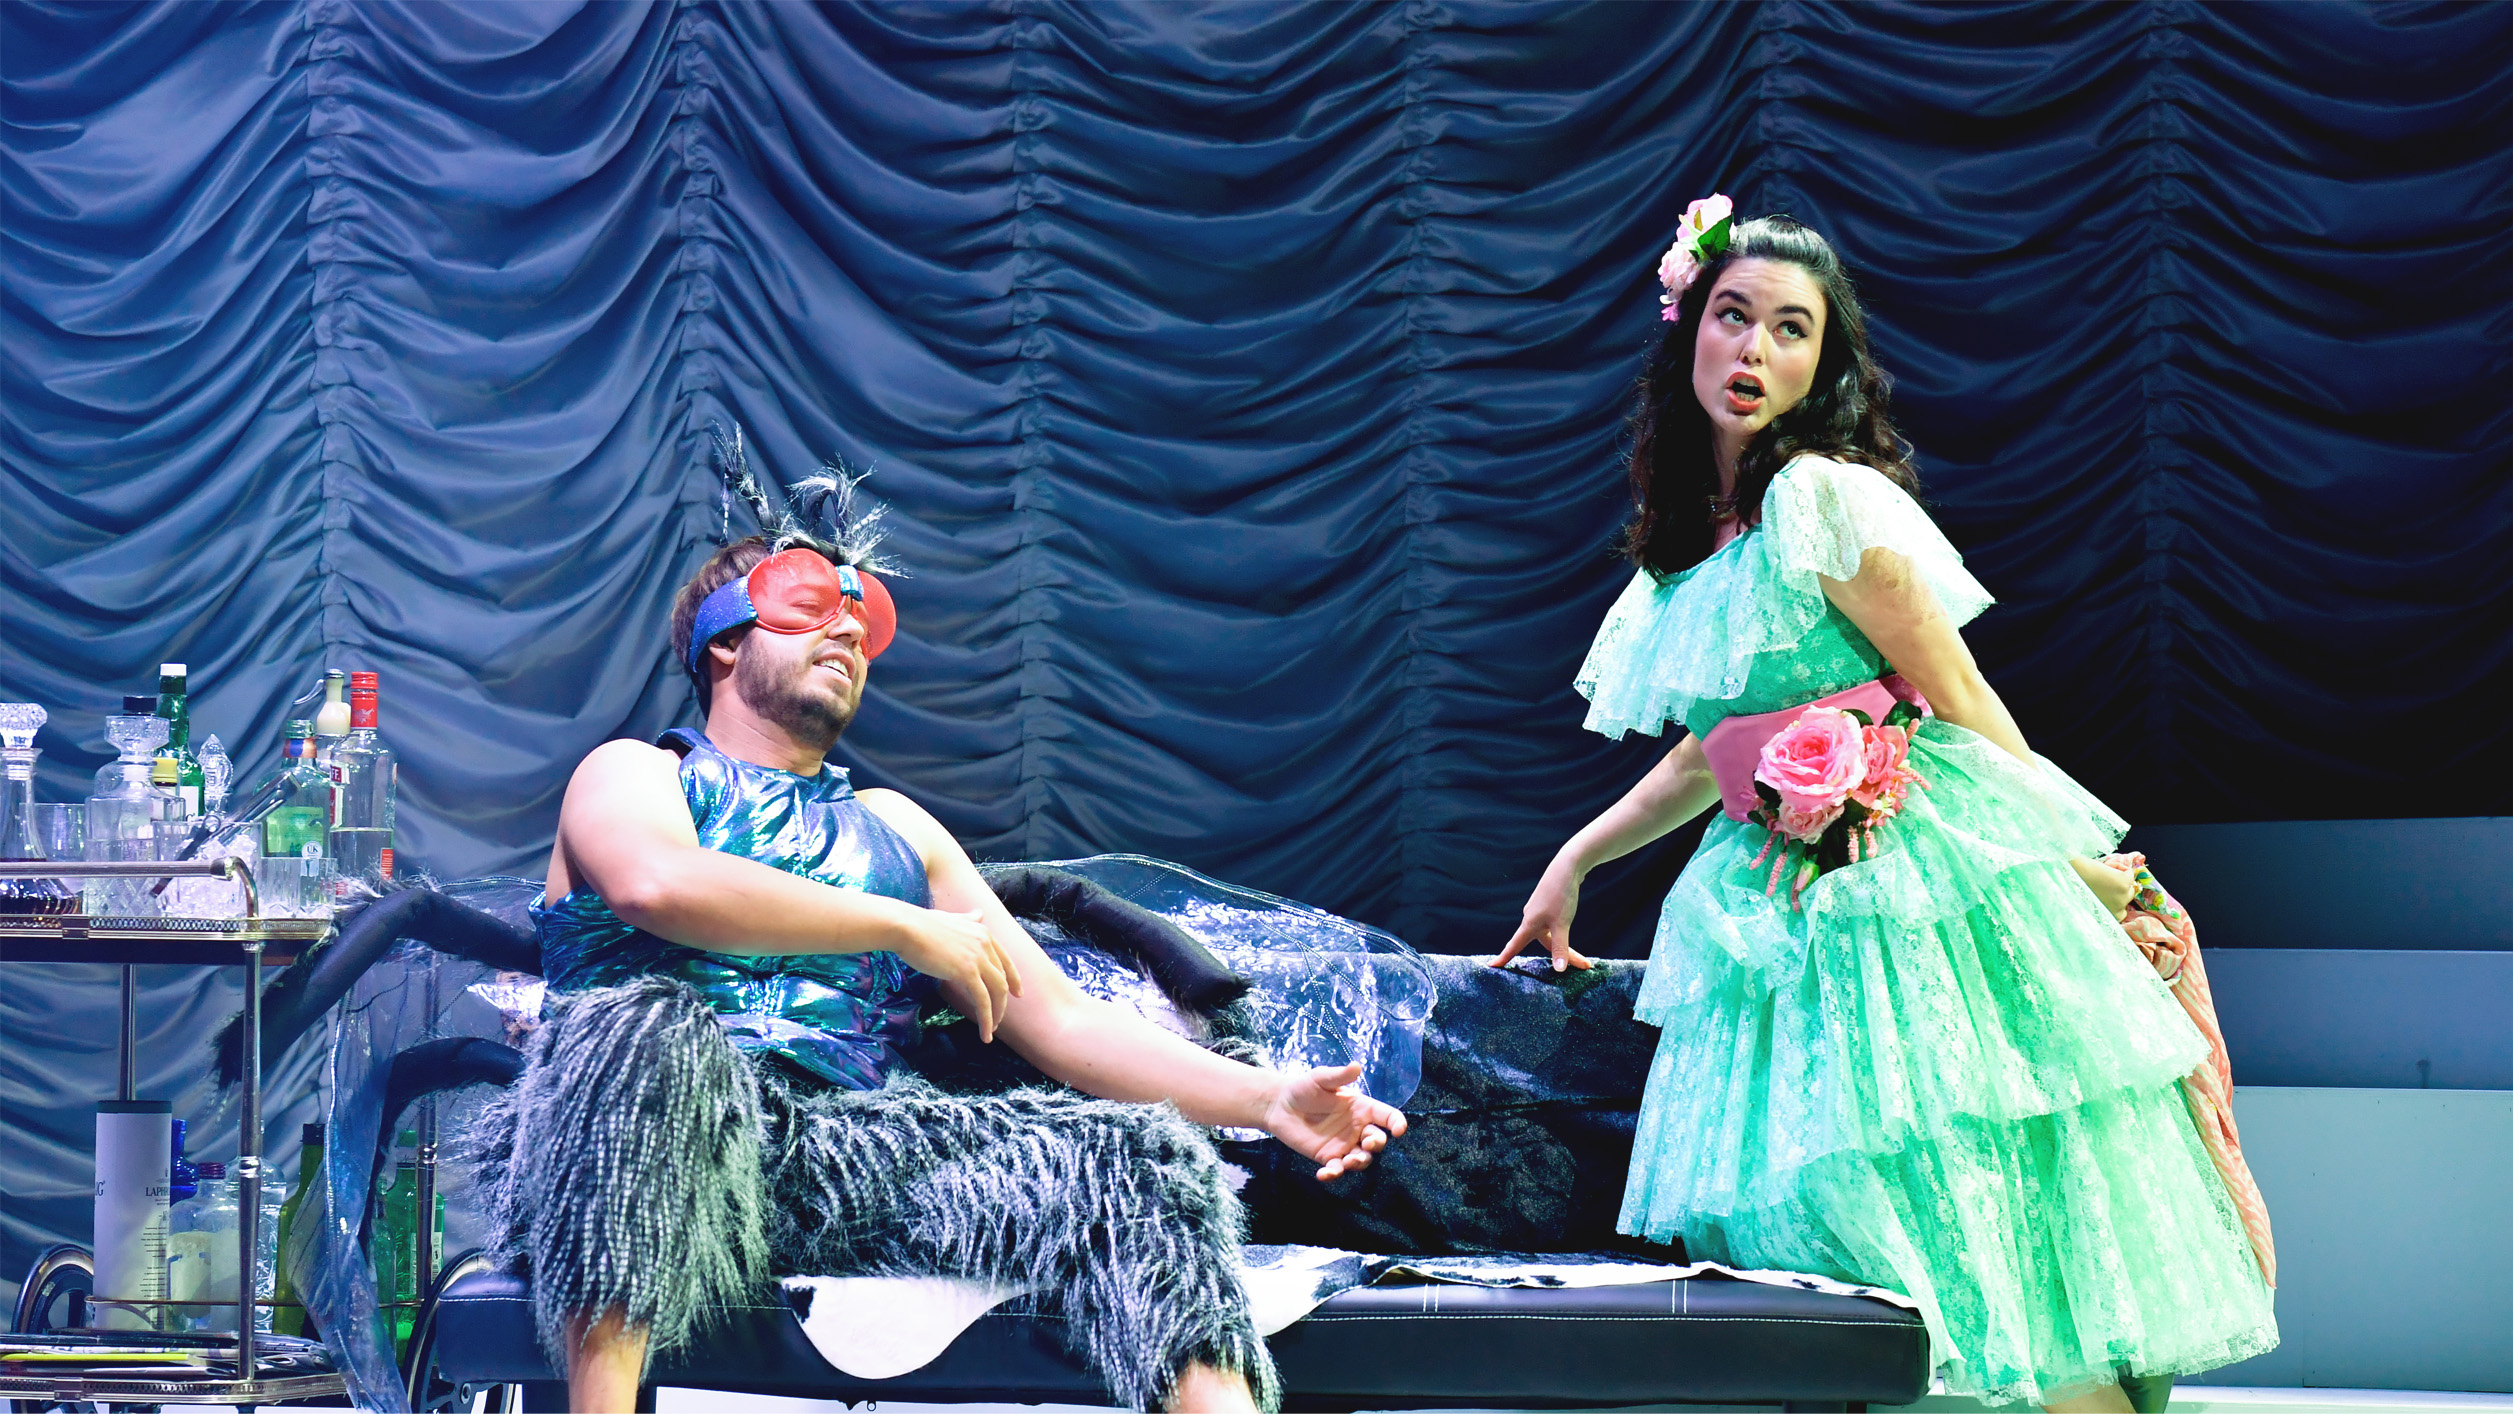 Two students performing in an opera, the man dressed as a fly sitting on a sofa, with a female student dressed in a light green, frilly dress, standing next to him, singing towards the audience, with a dark background.